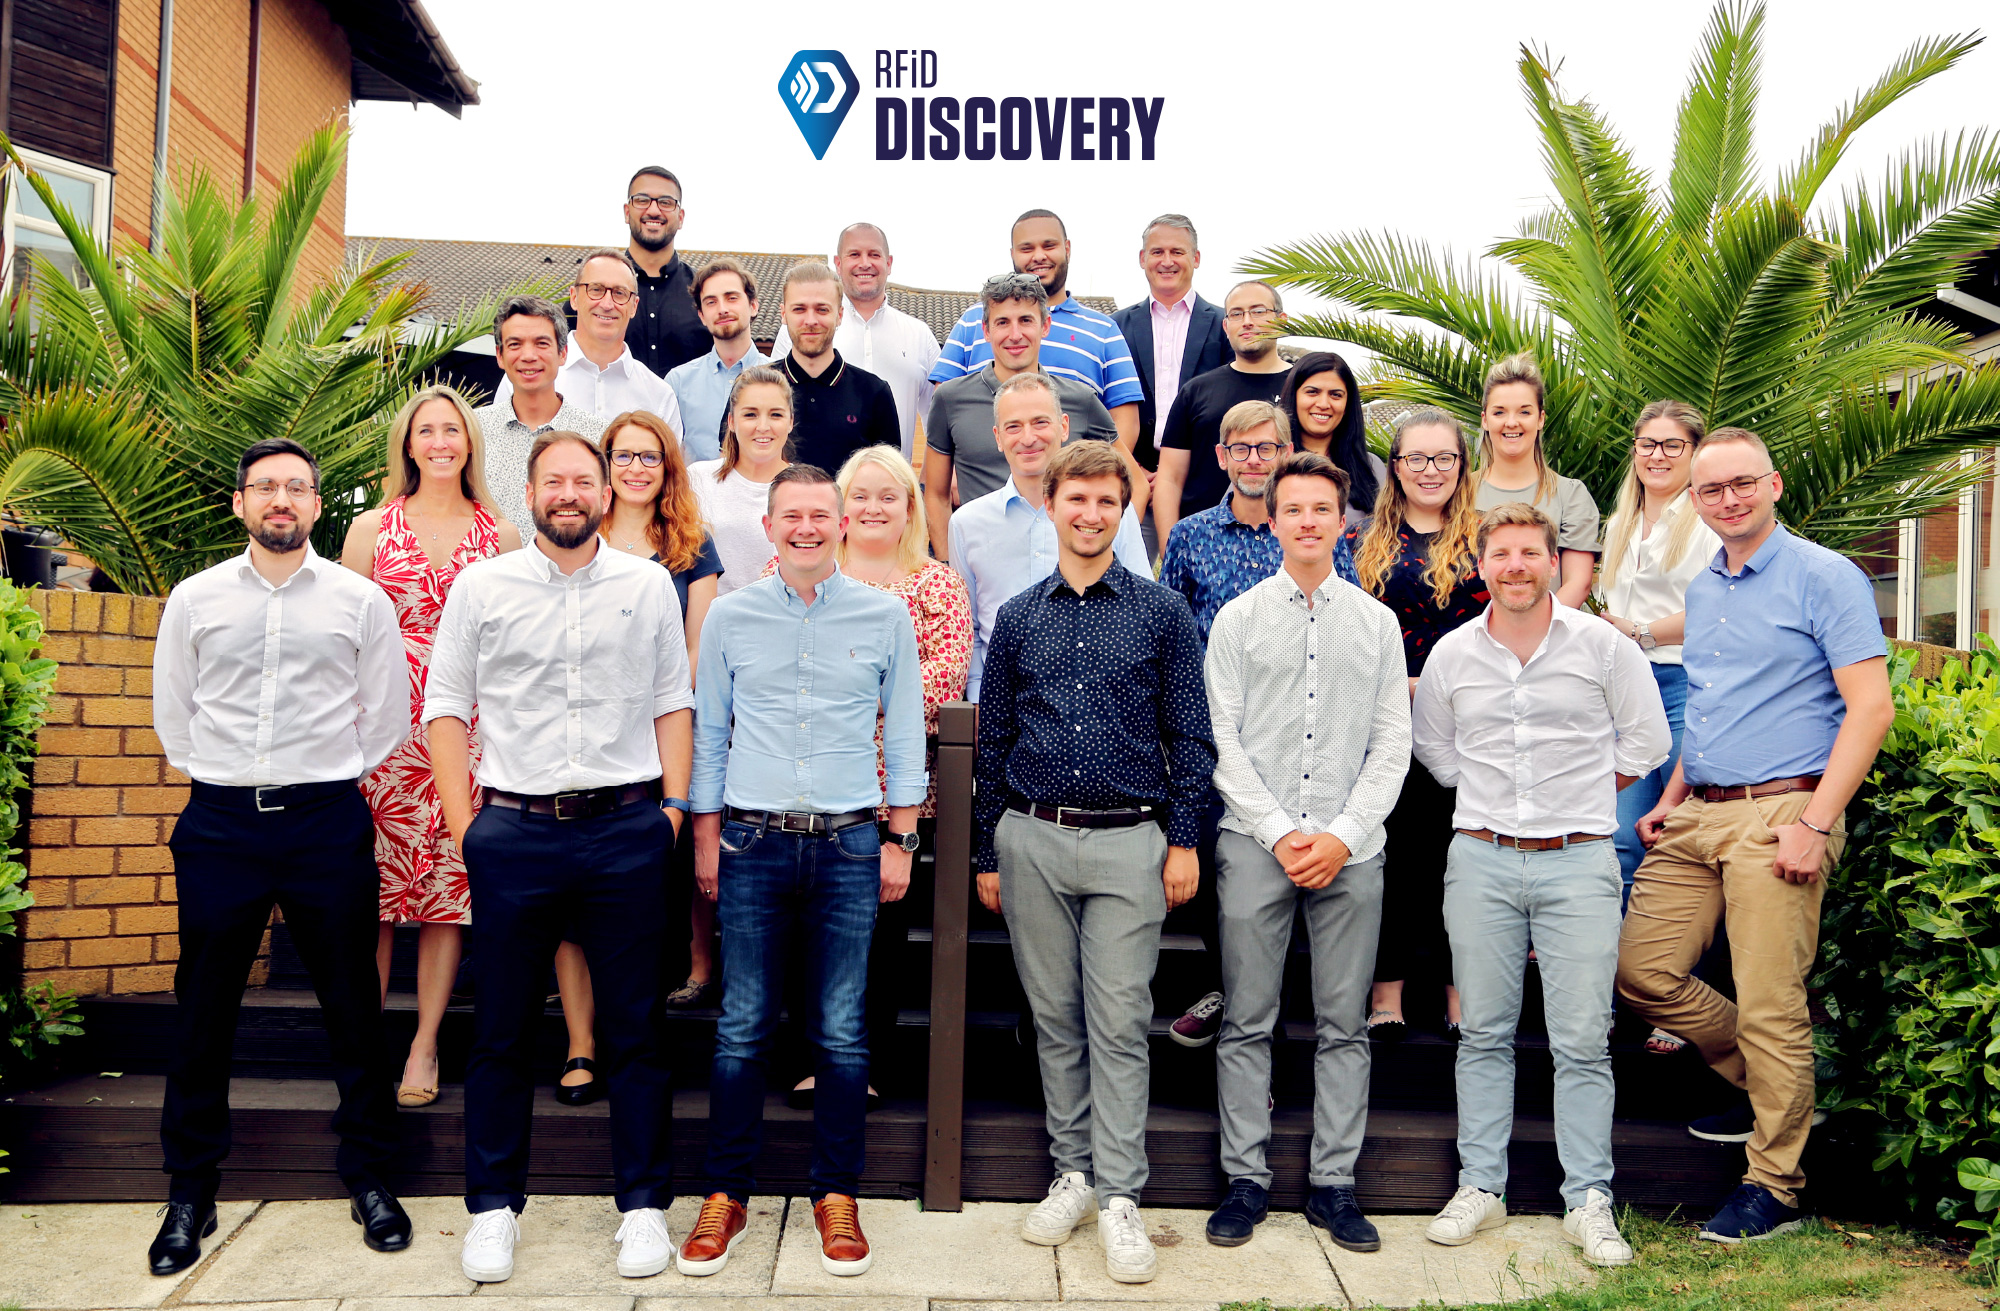 The RFiD Discovery/Tracktio Family